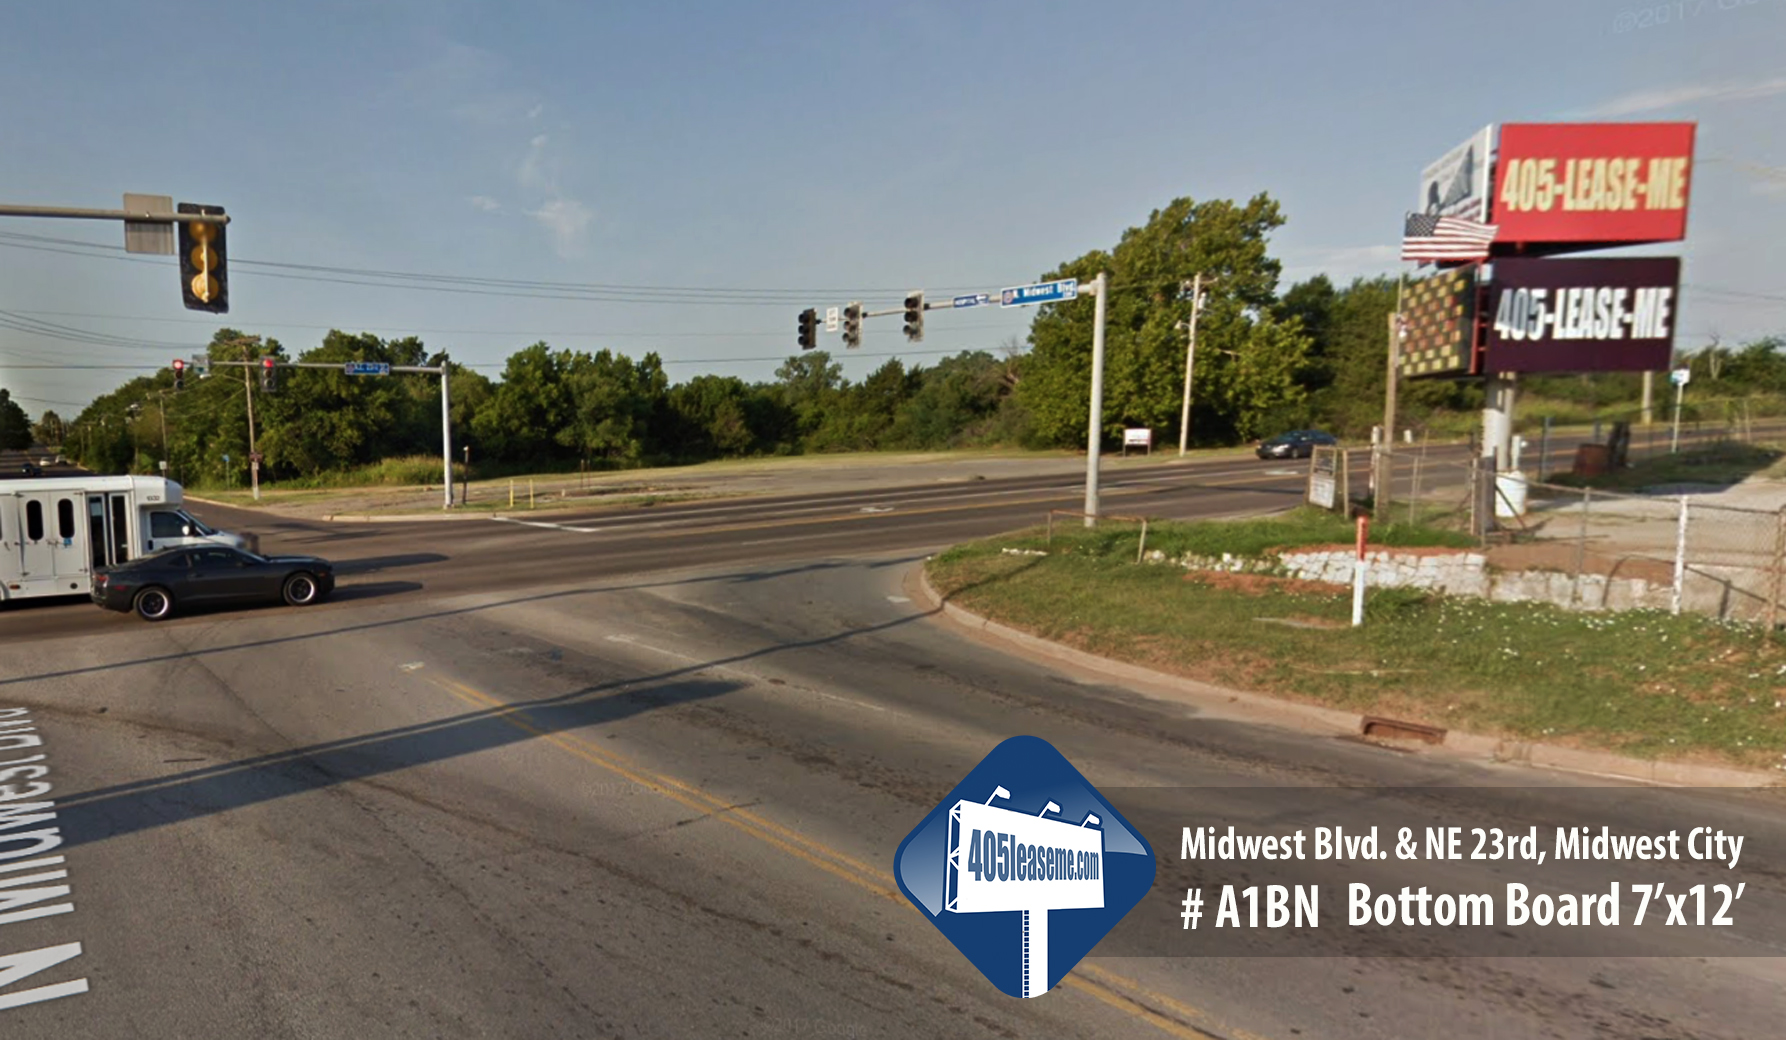 1 Midwest City - A1BN